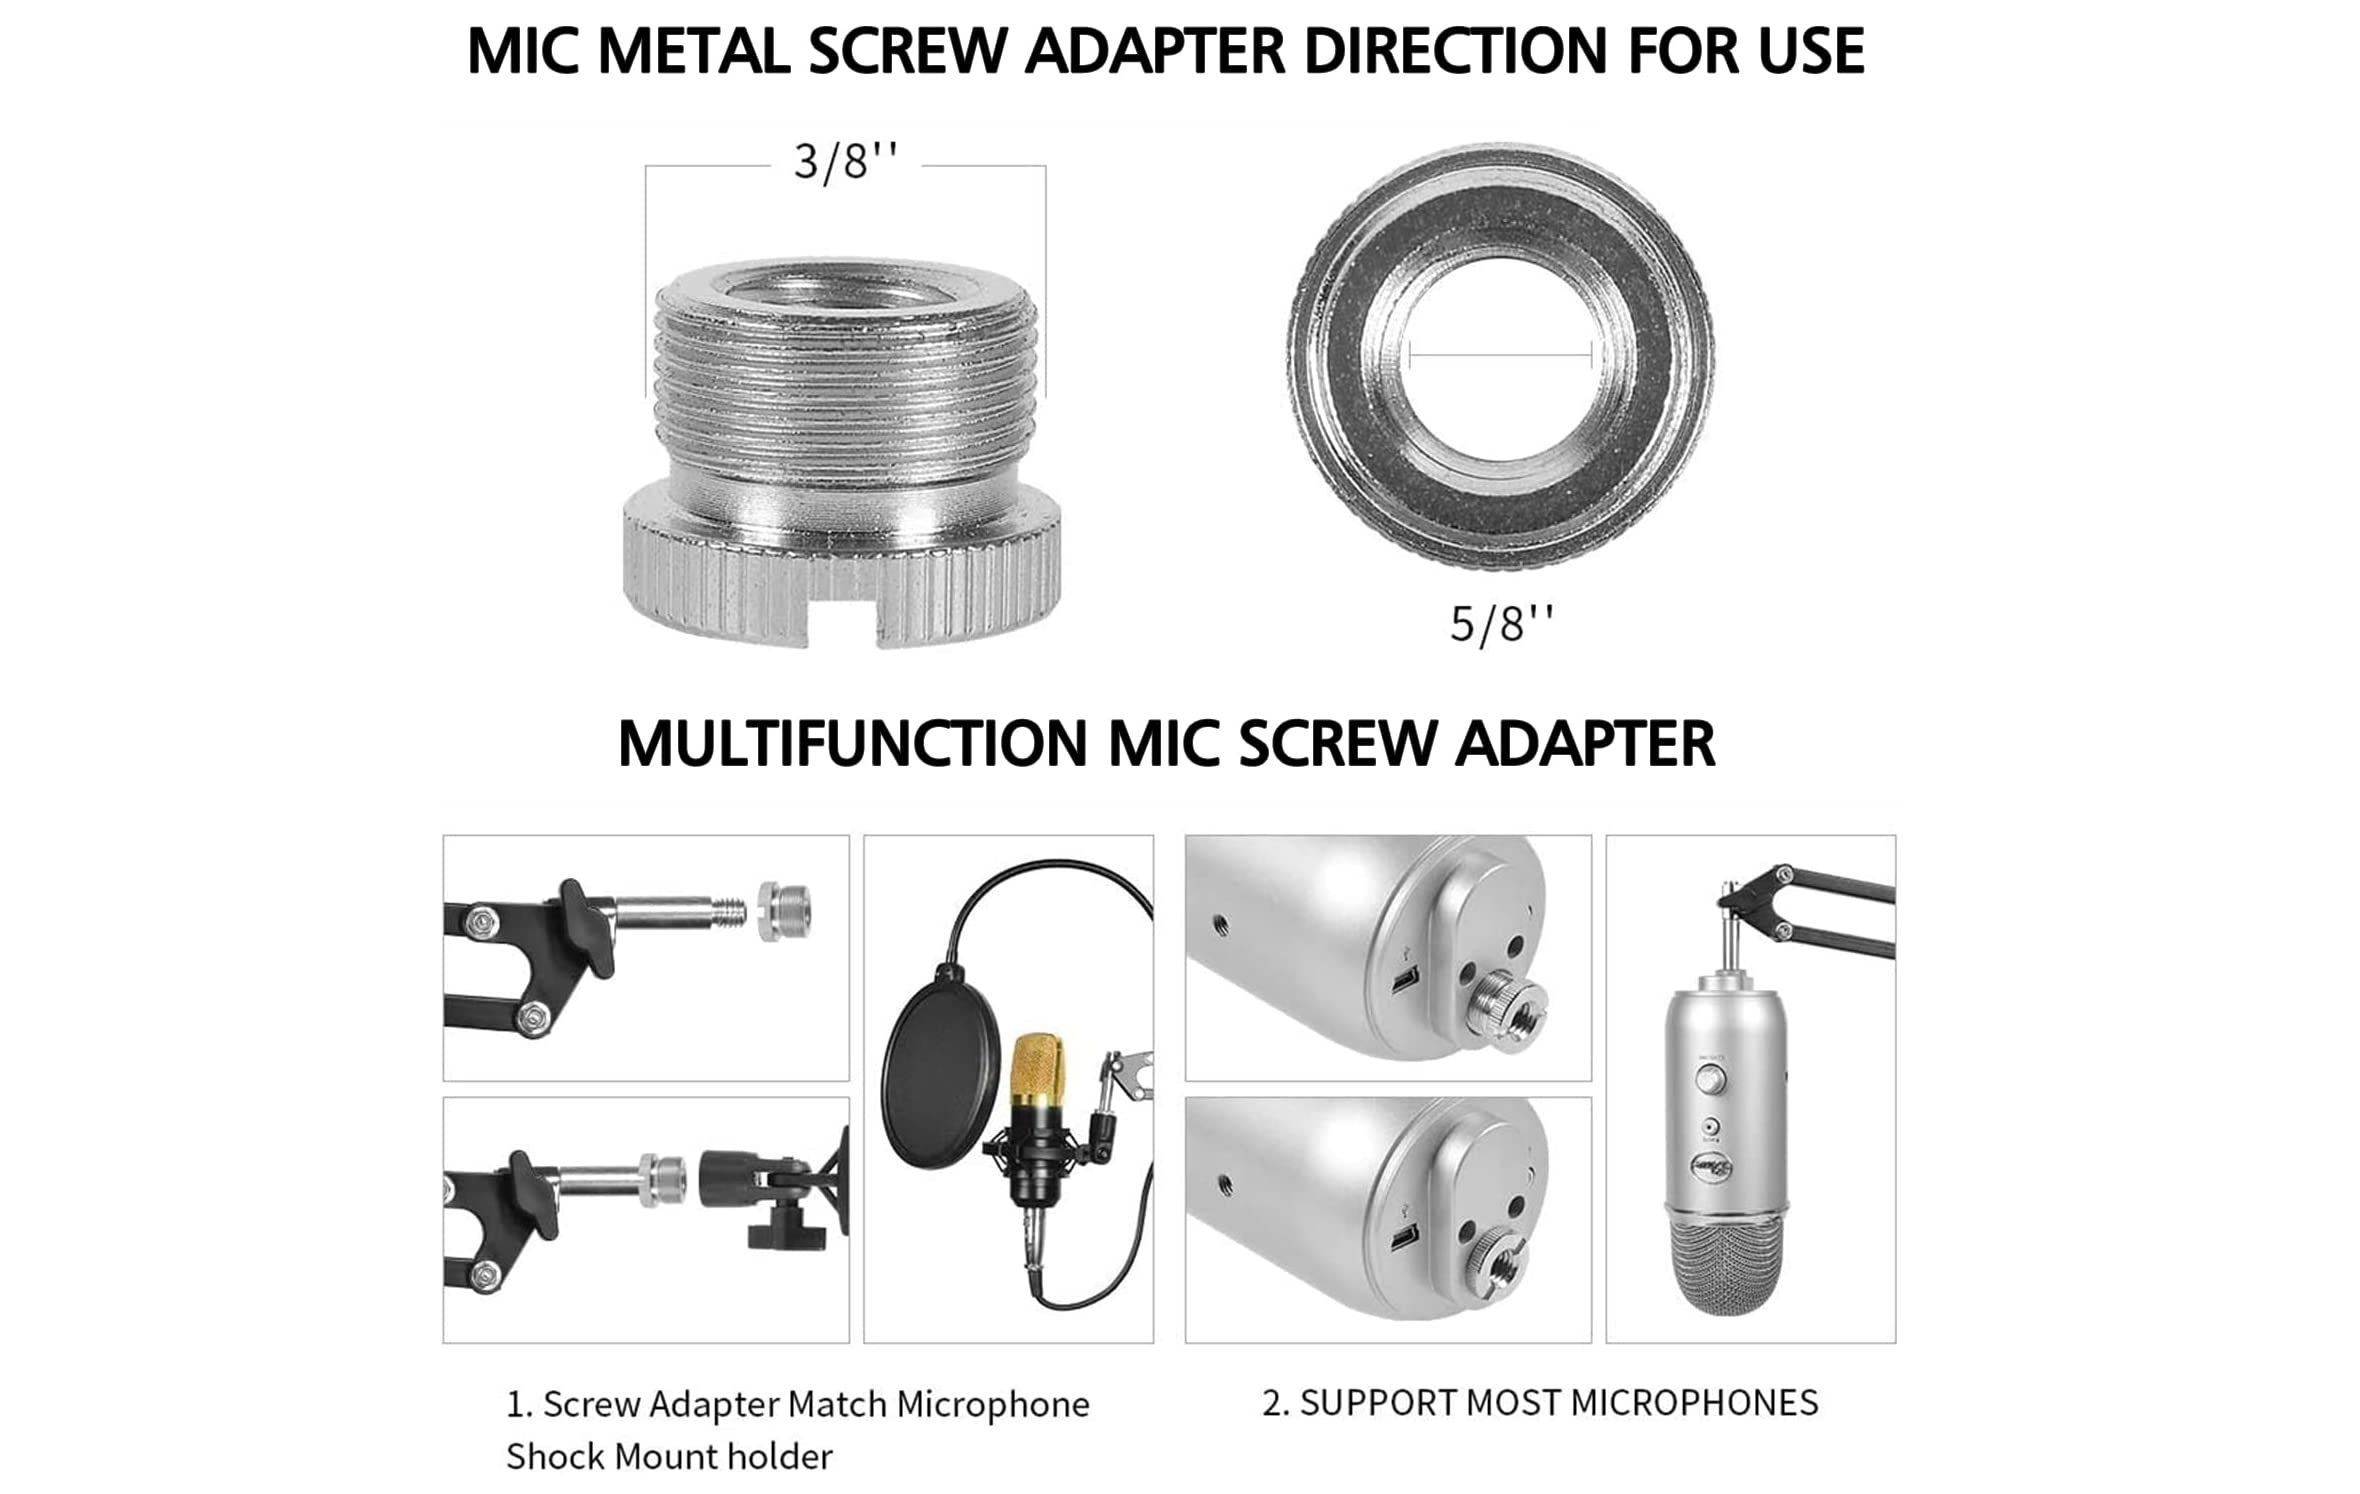 the mic metal screw adapter featured on the luling arts microphone arm